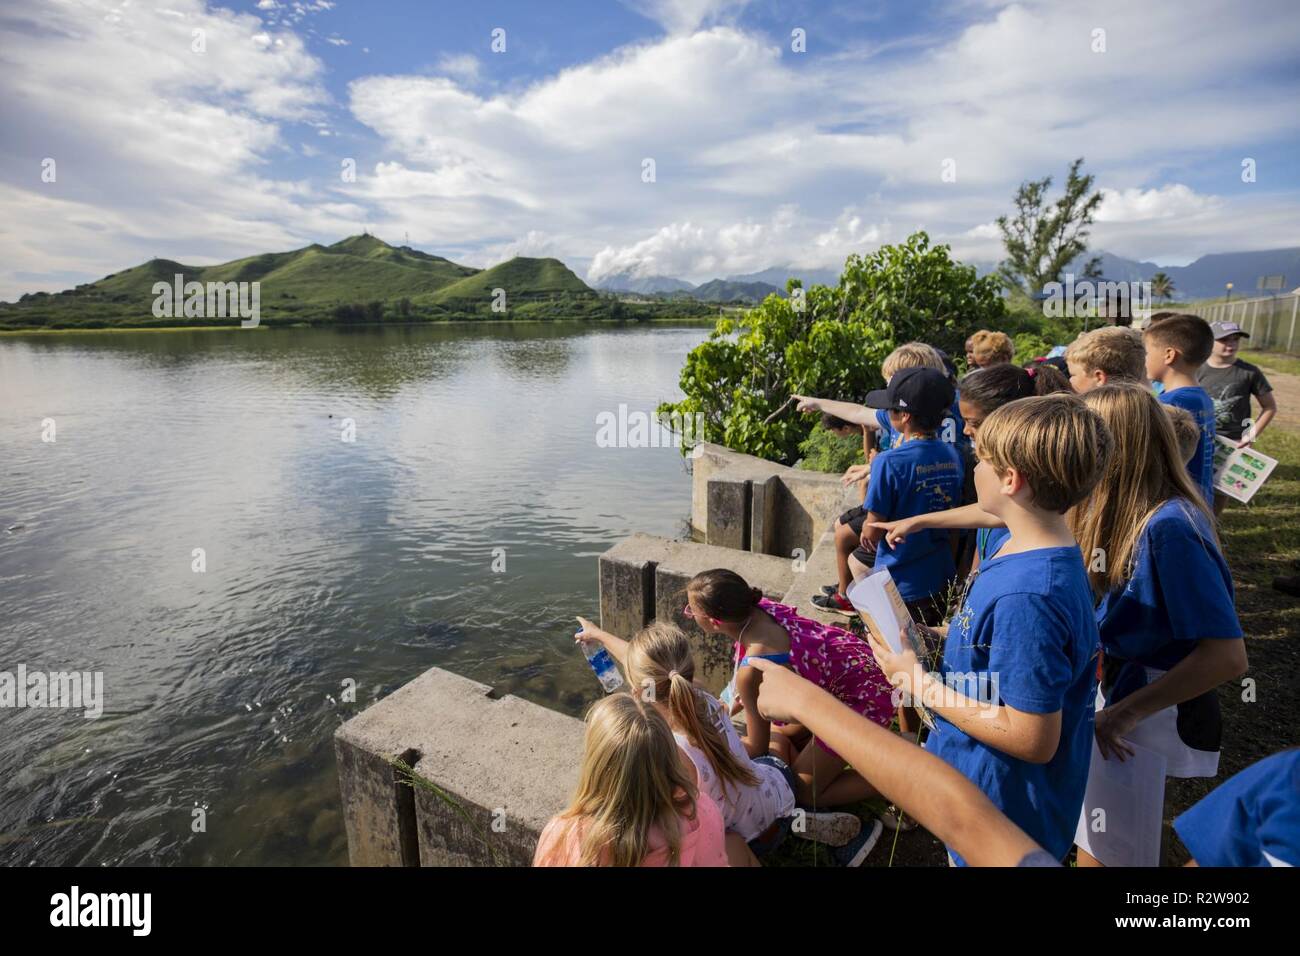 Students with Mokapu Elementary School take a tour of the Nu’ Upia Ponds during a field trip, Marine Corps Base Hawaii, Nov. 14, 2018. The base’s Environmental Department partnered with the school to host a cultural learning field trip to teach students the significance of the ponds and the Hawaiian culture. Stock Photo